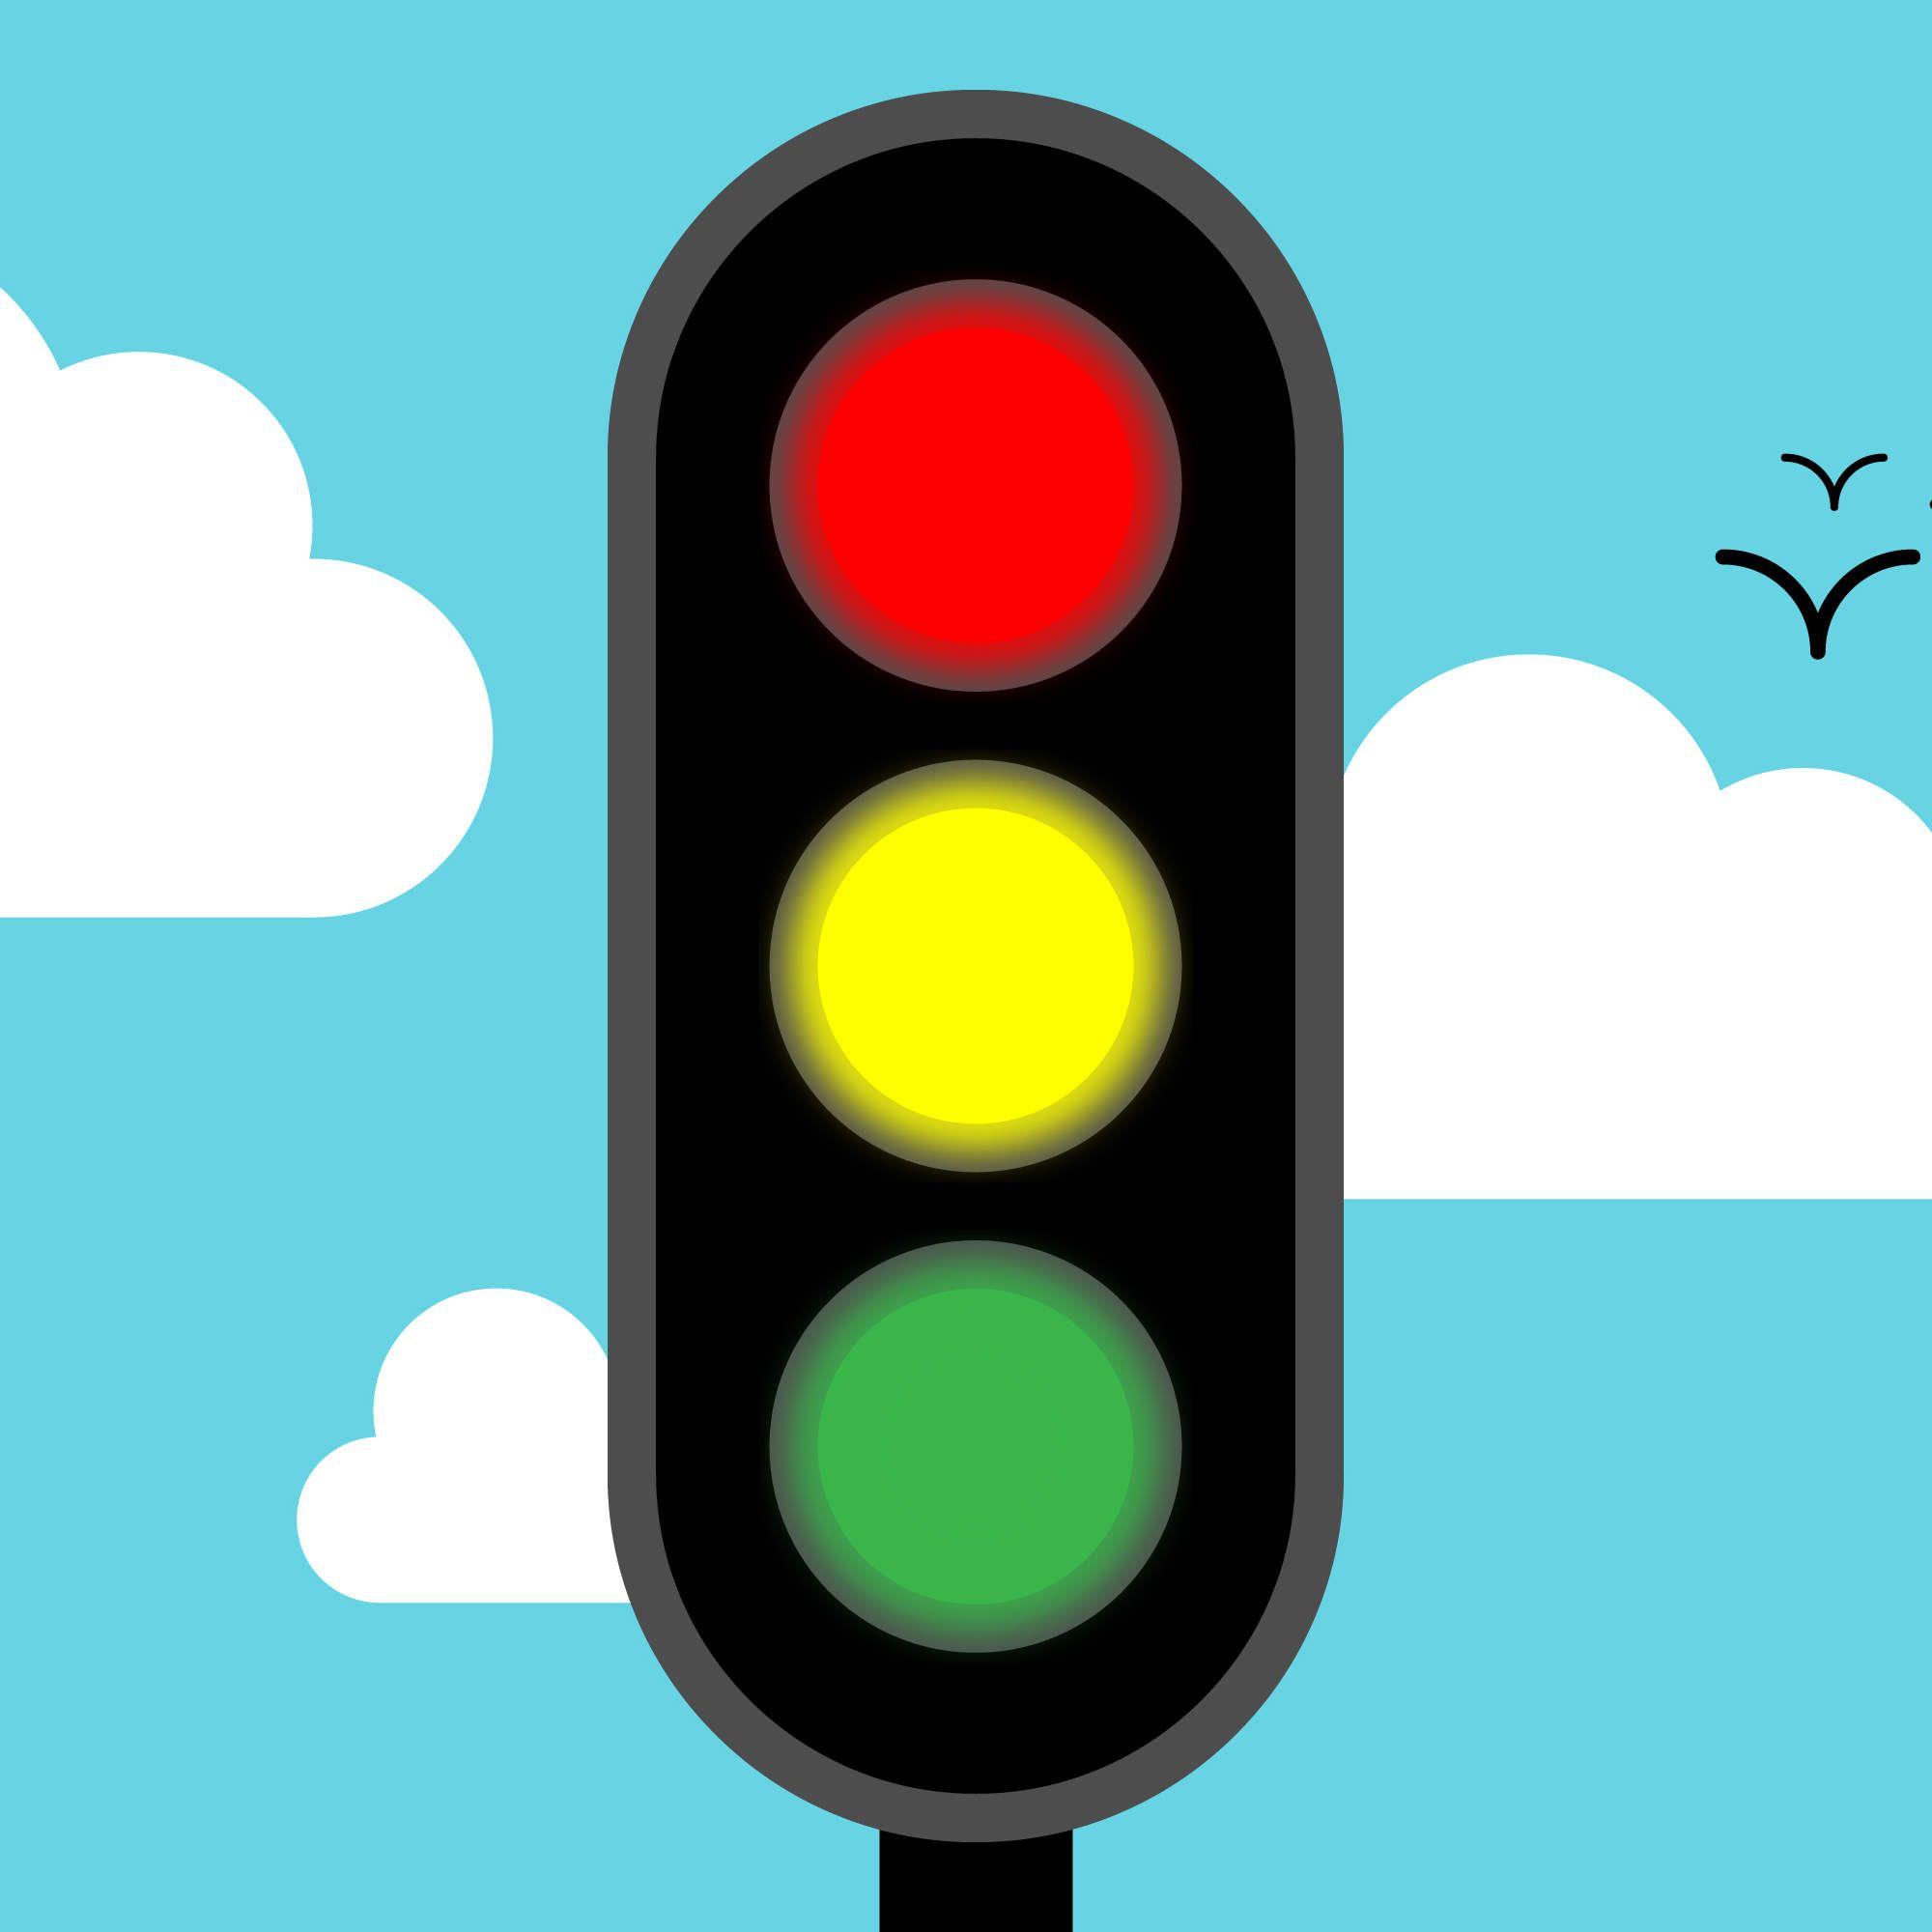 The Reason Traffic Lights Are Red, Yellow, and Green | Traffic light ...